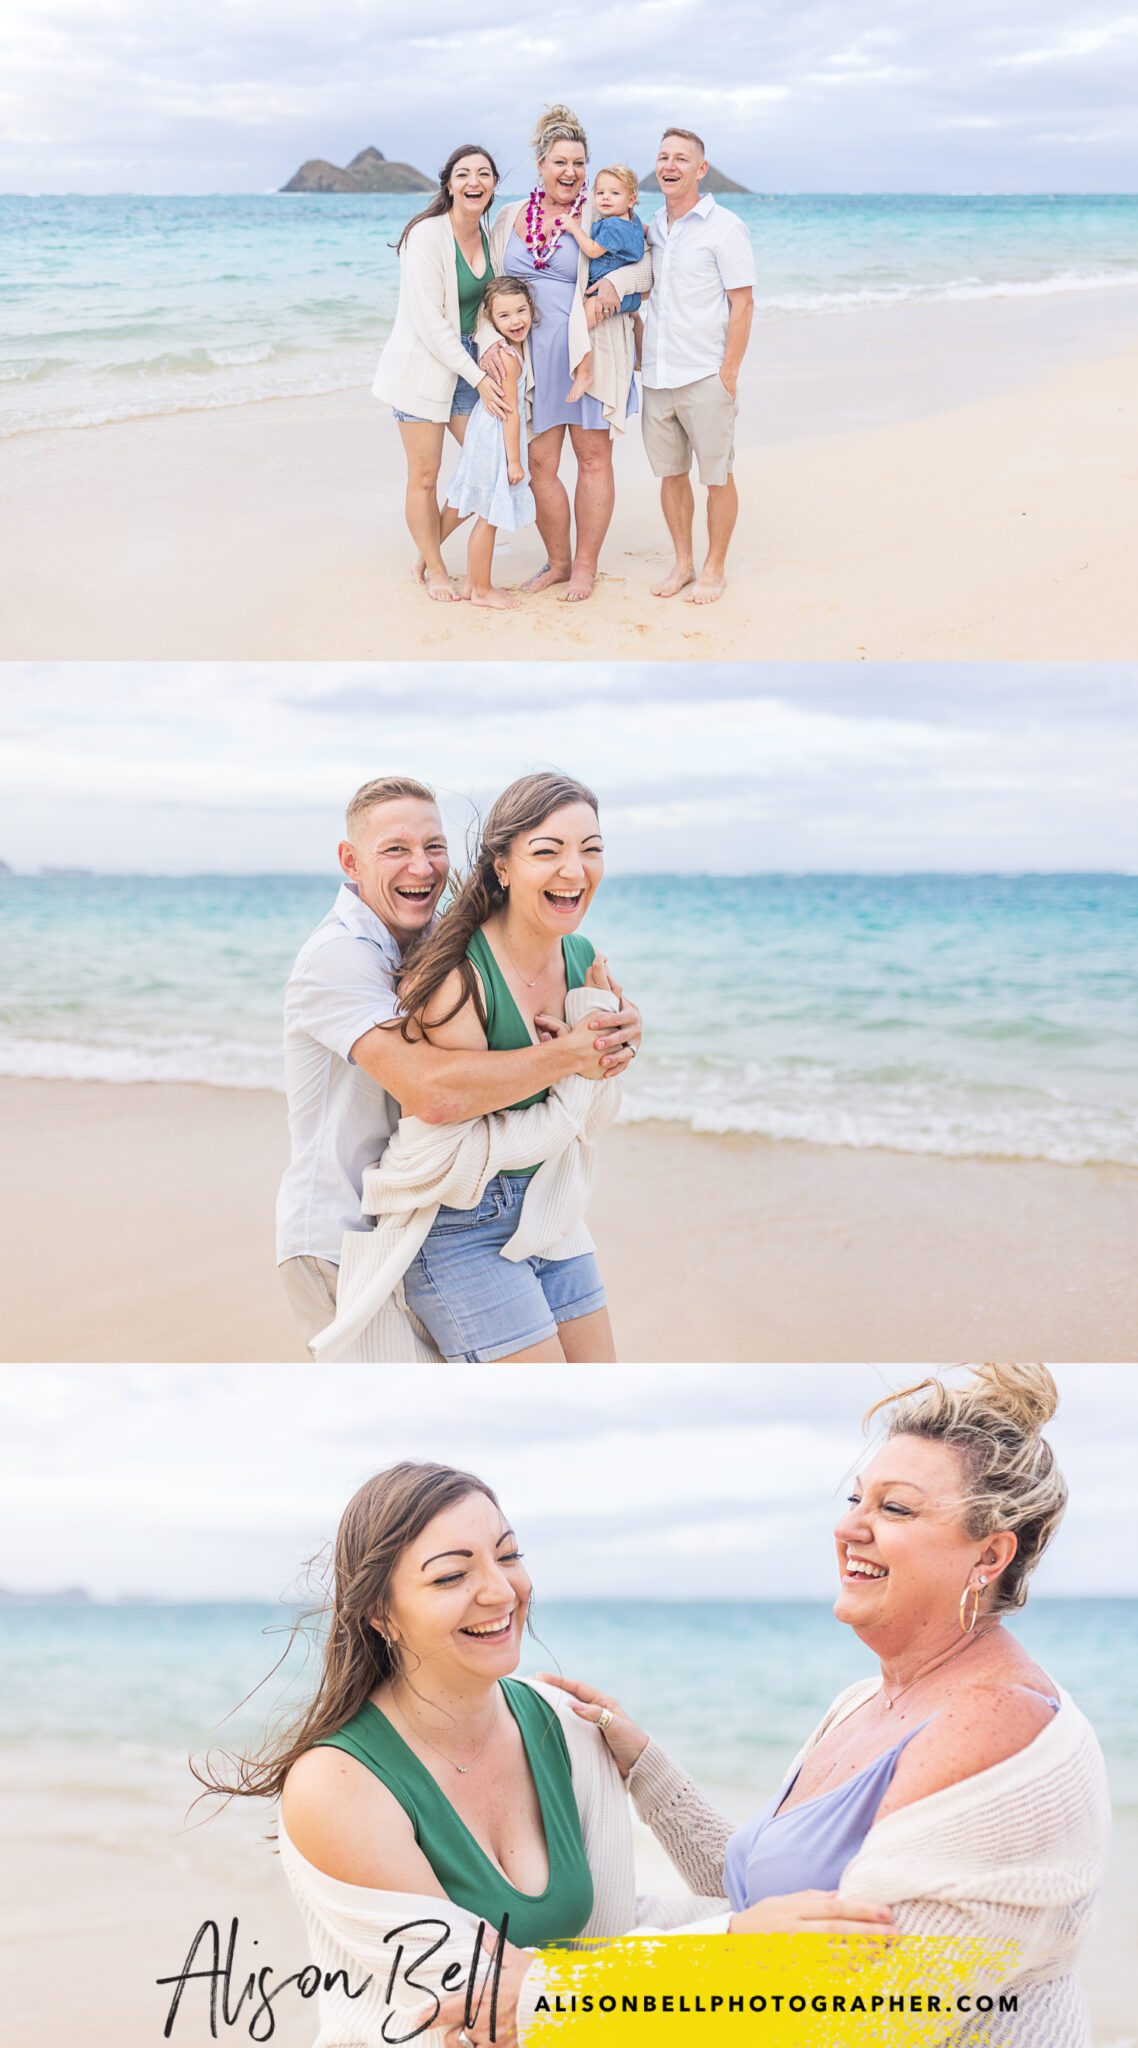 Oahu photographer mini session at Lanikai Beach by Alison Bell, Photographer